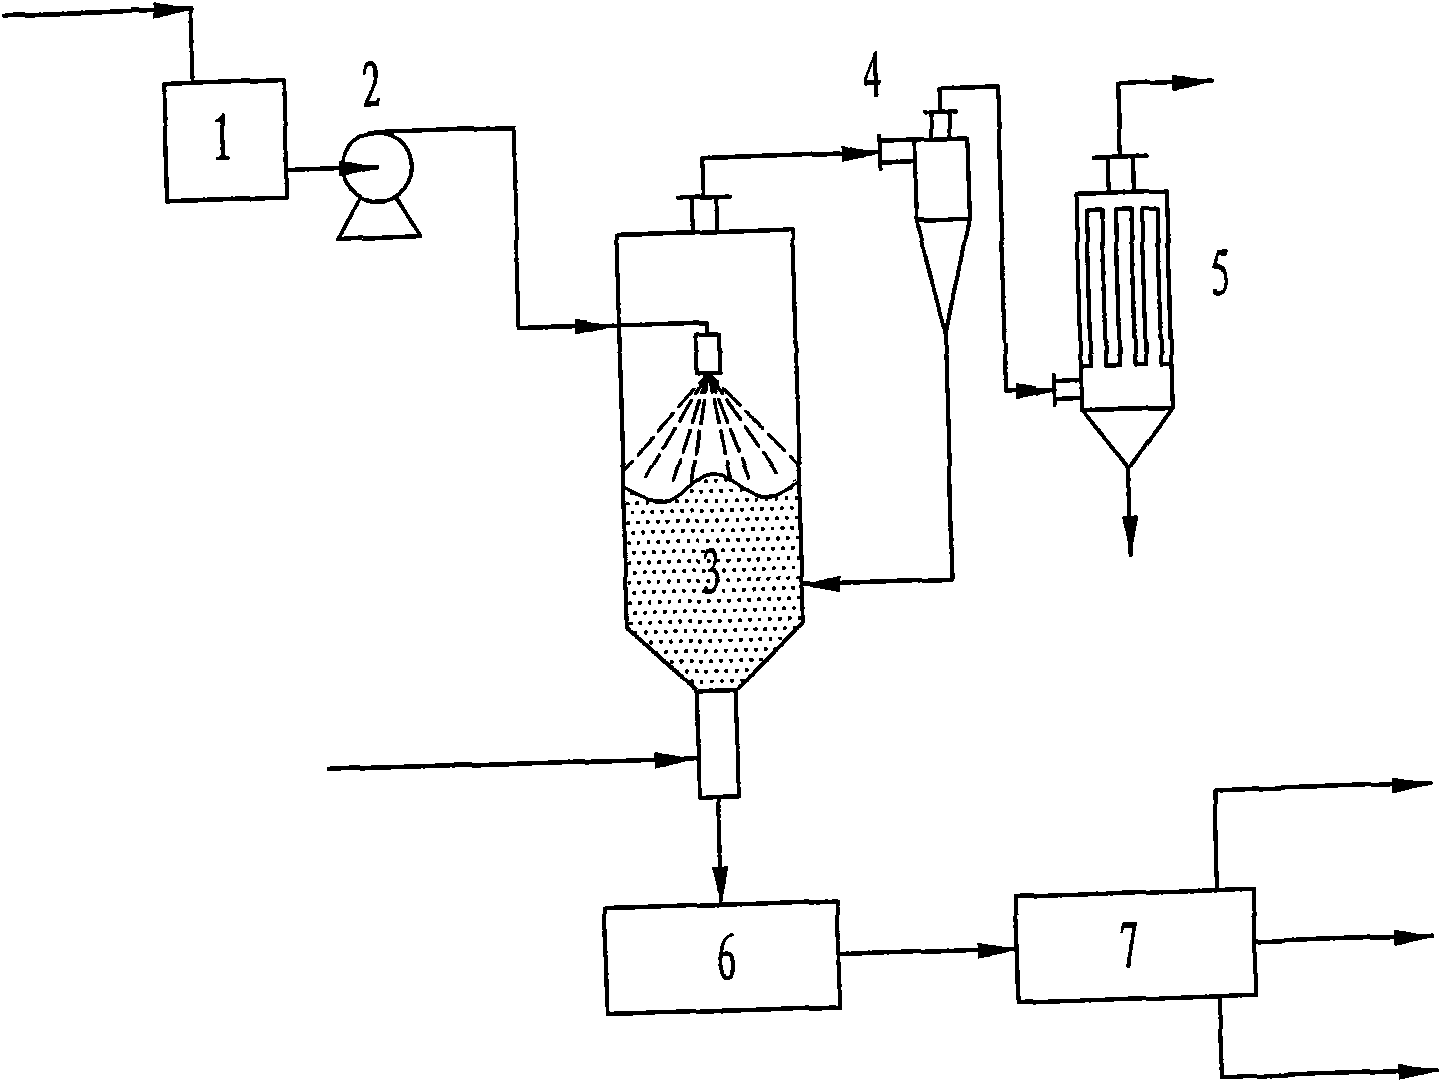 Method of granulation by spraying melted nicotinamide